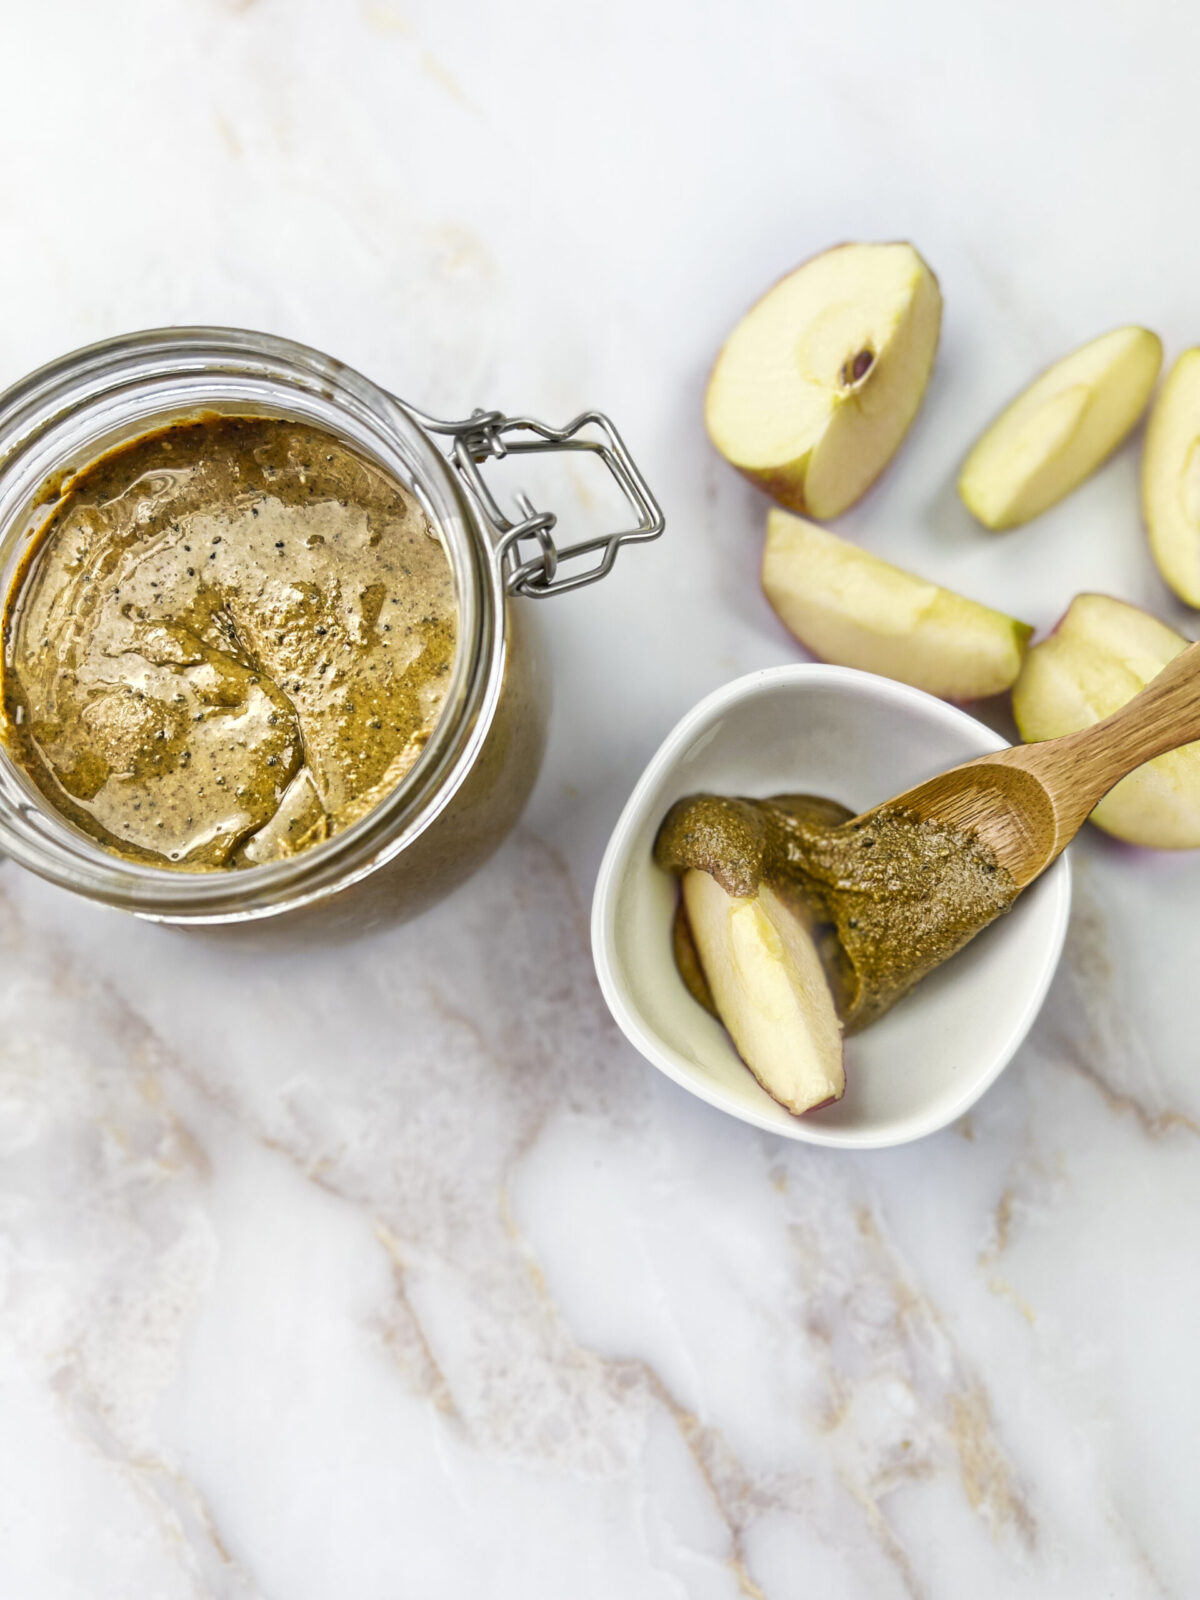 A jar filled with homemade Nutty Bliss Nut Butter accompanied by slices of fresh apples.